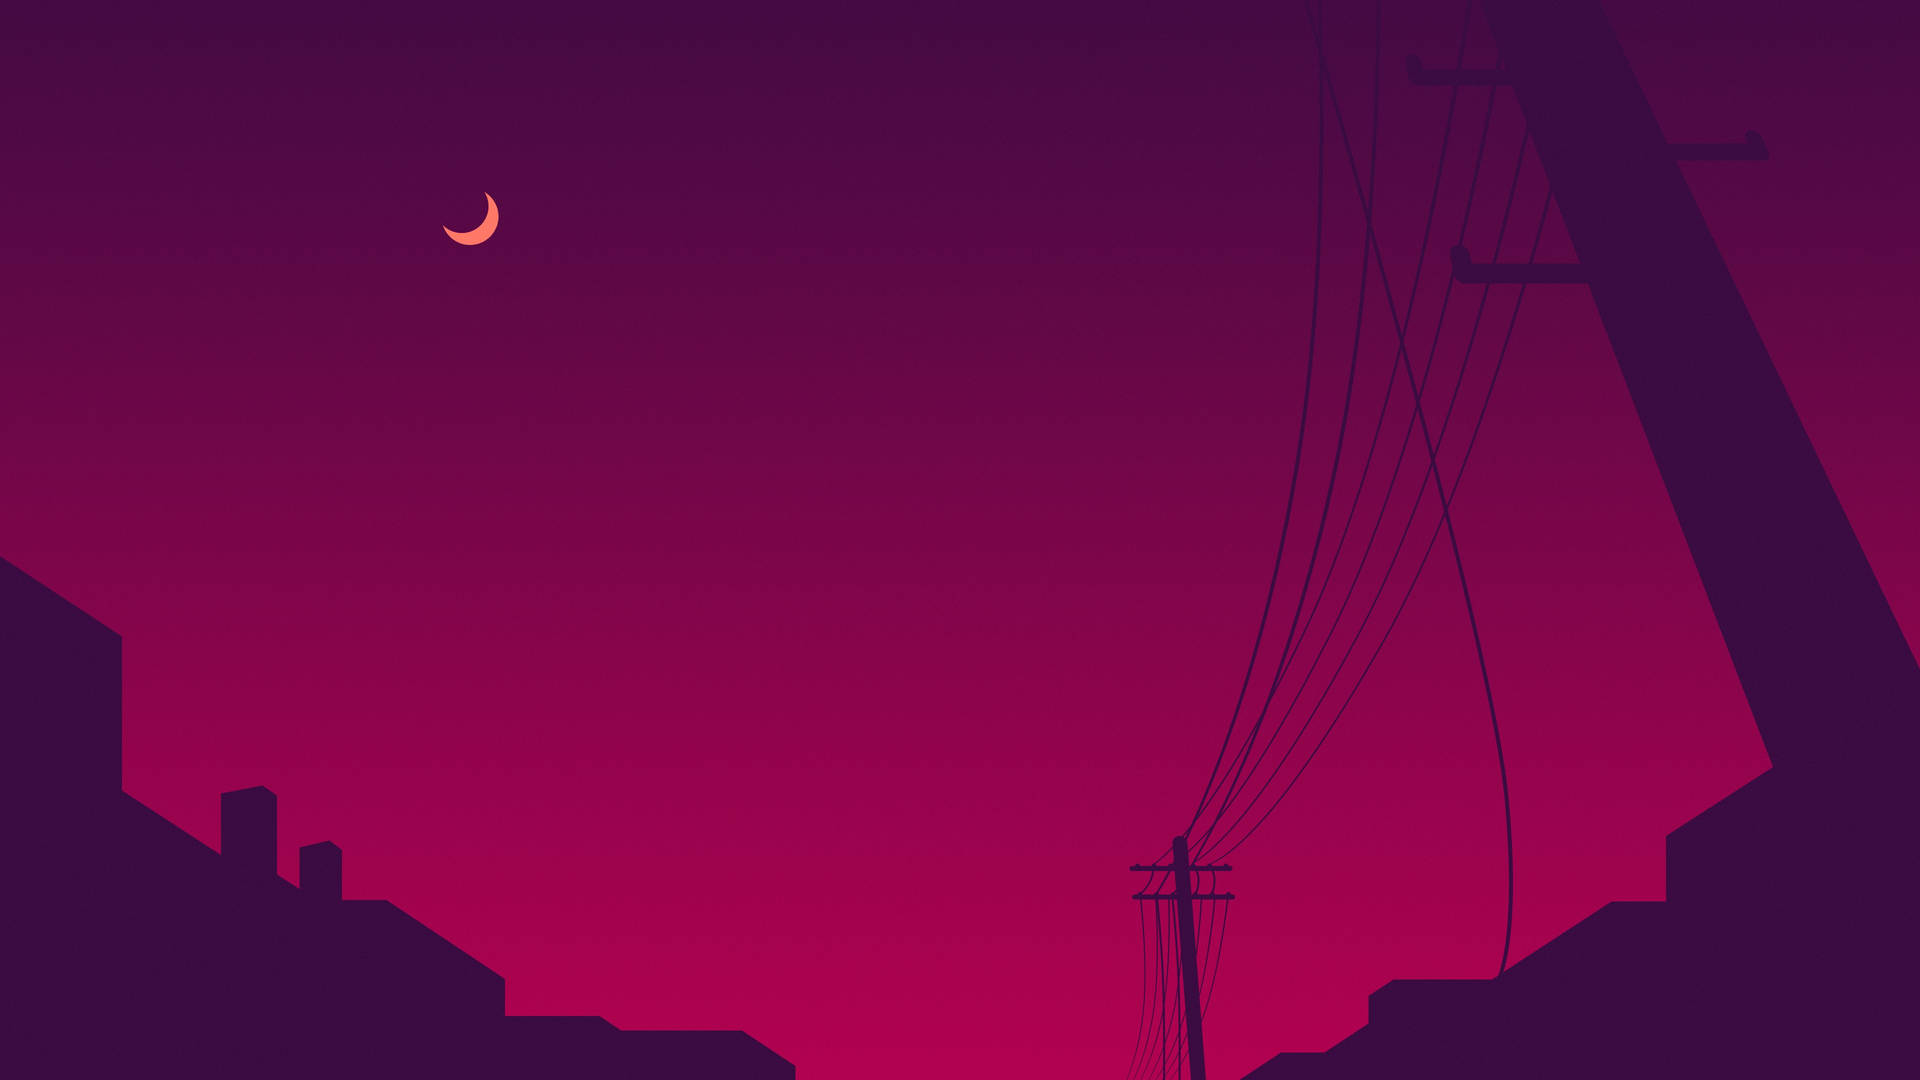 Aesthetic Moon Above The Power Lines Wallpaper